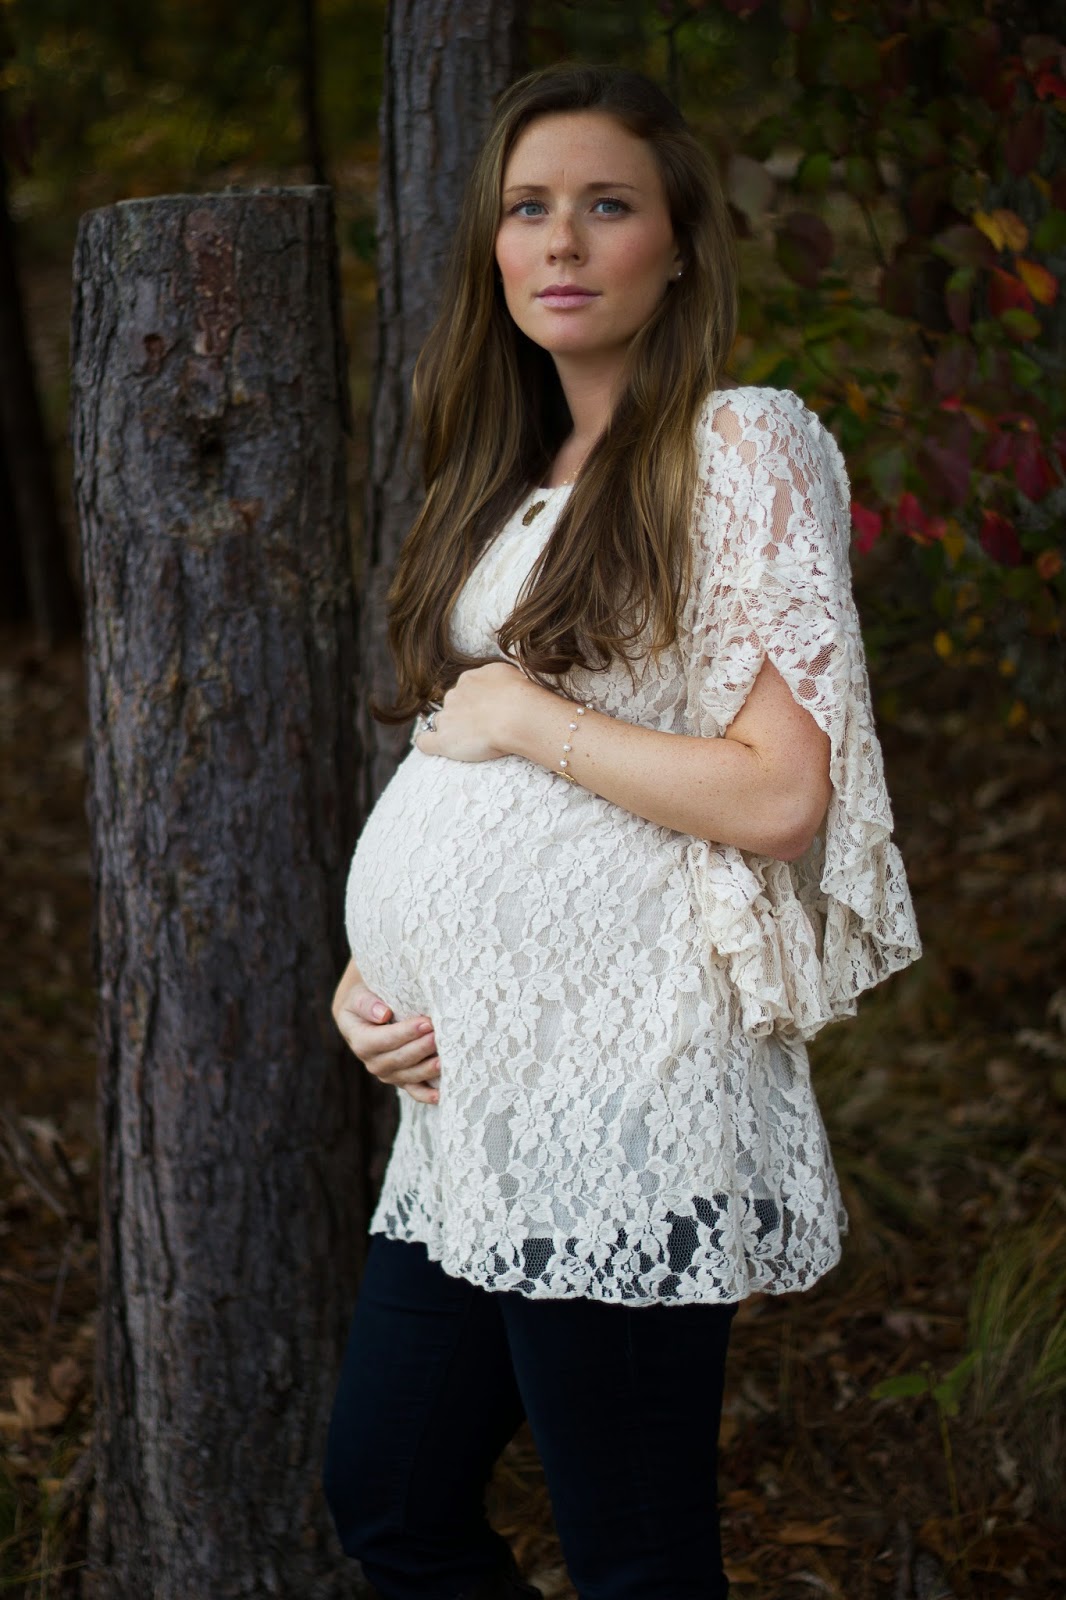 Moody maternity photo woman in lace dress in woods 